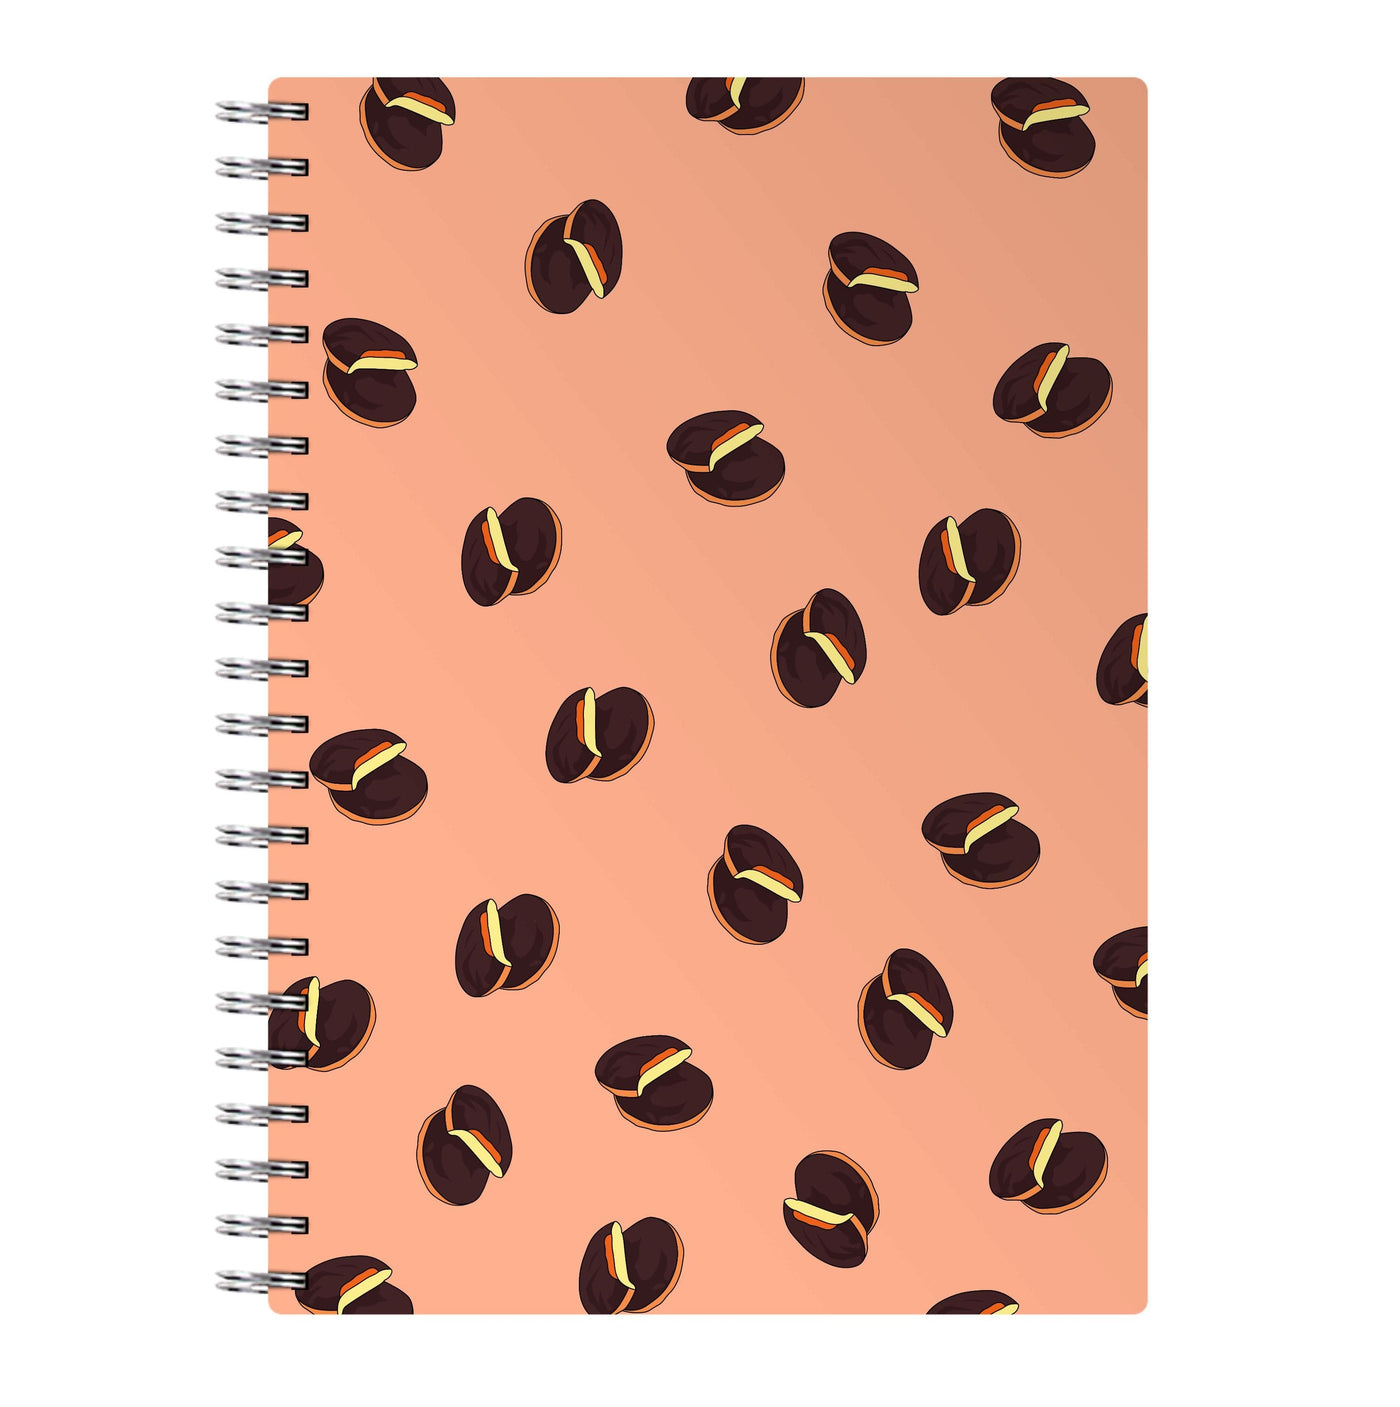 Jaffa Cakes - Biscuits Patterns Notebook